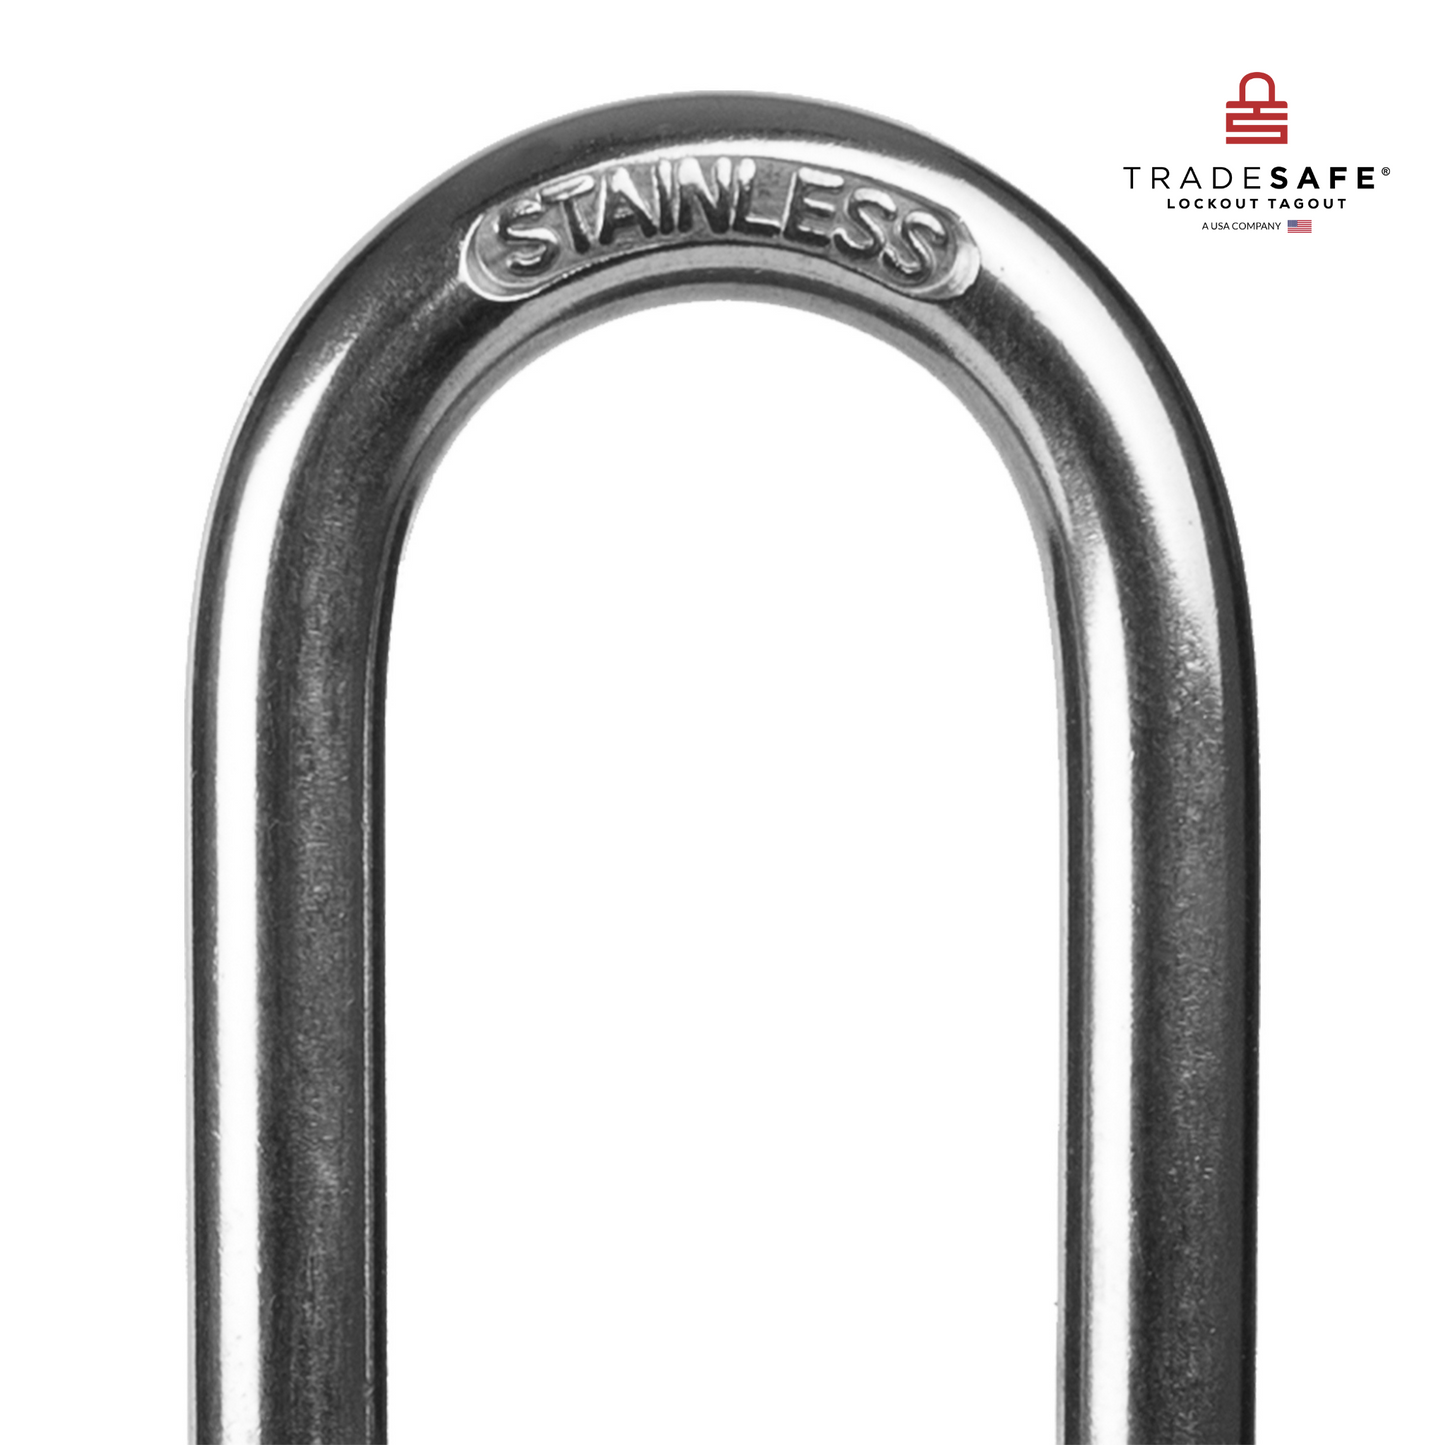 a close-up view of a loto padlock's stainless steel shackle